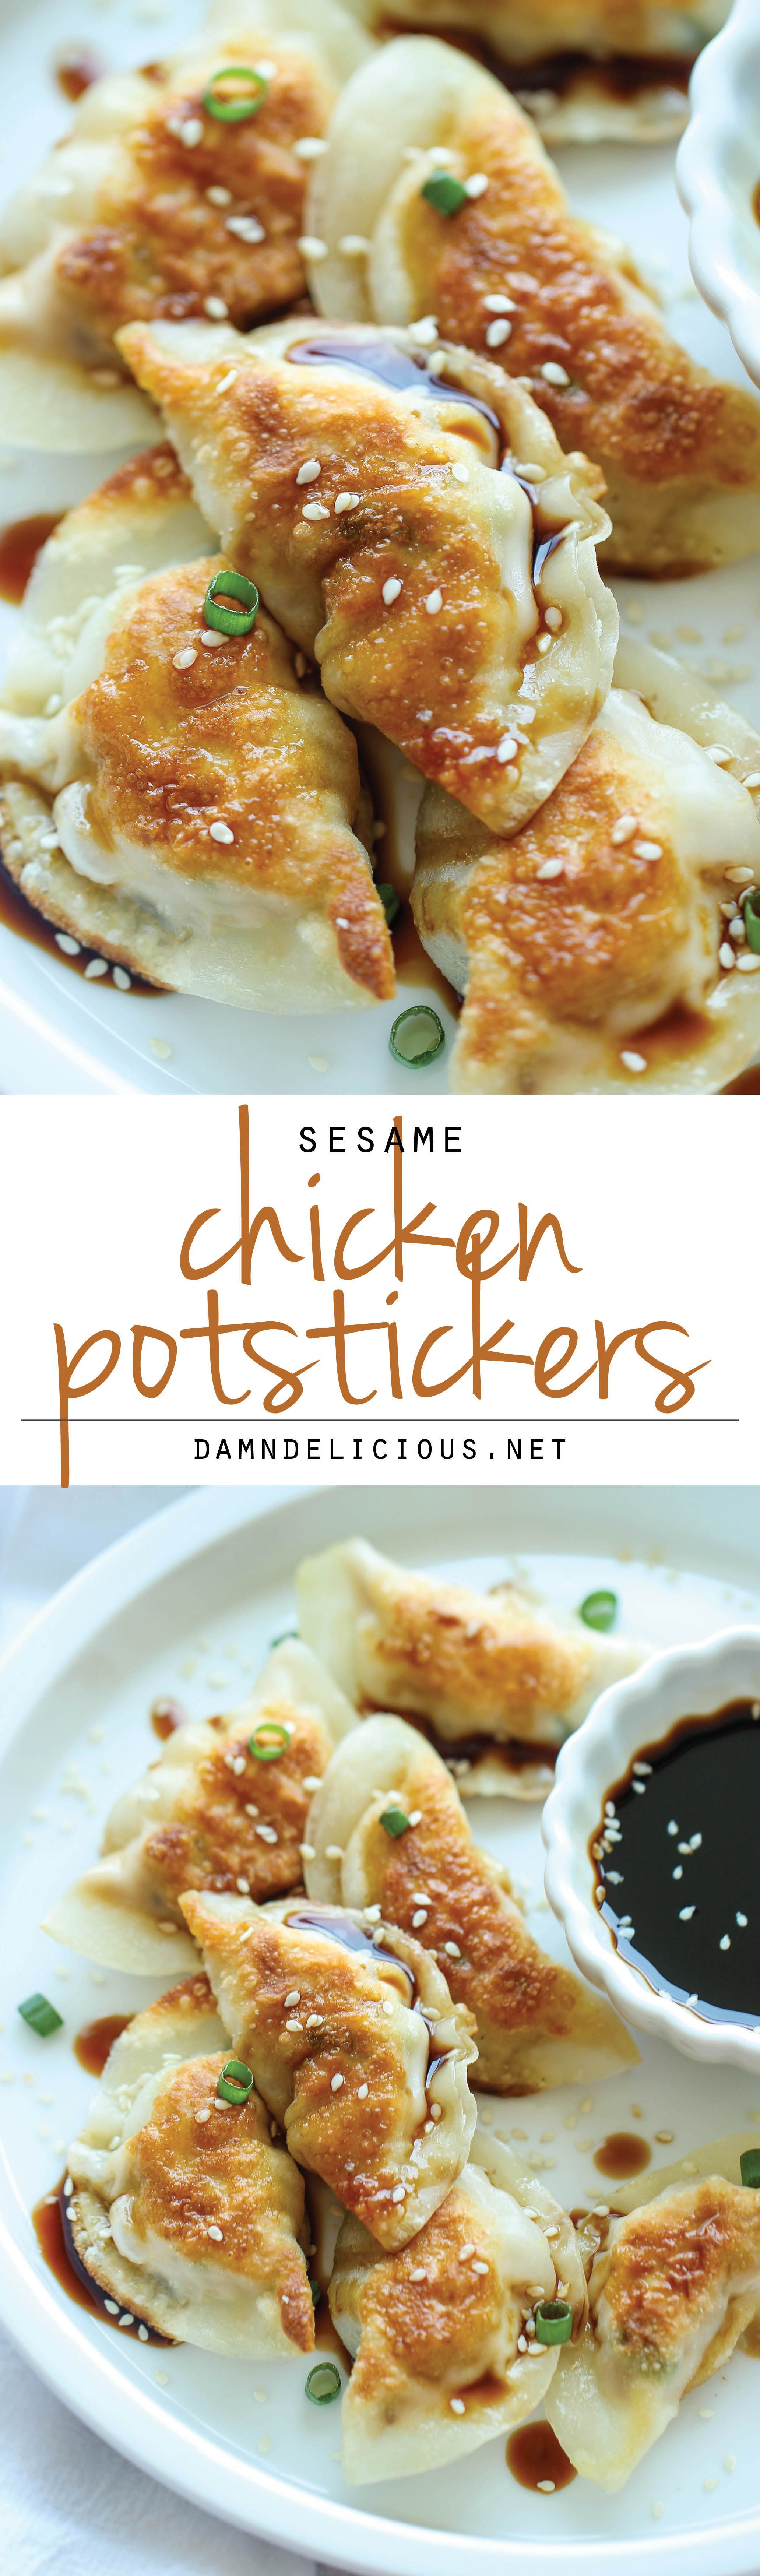 Sesame Chicken Potstickers – These are unbelievably easy to make. And theyre freezer-friendly too